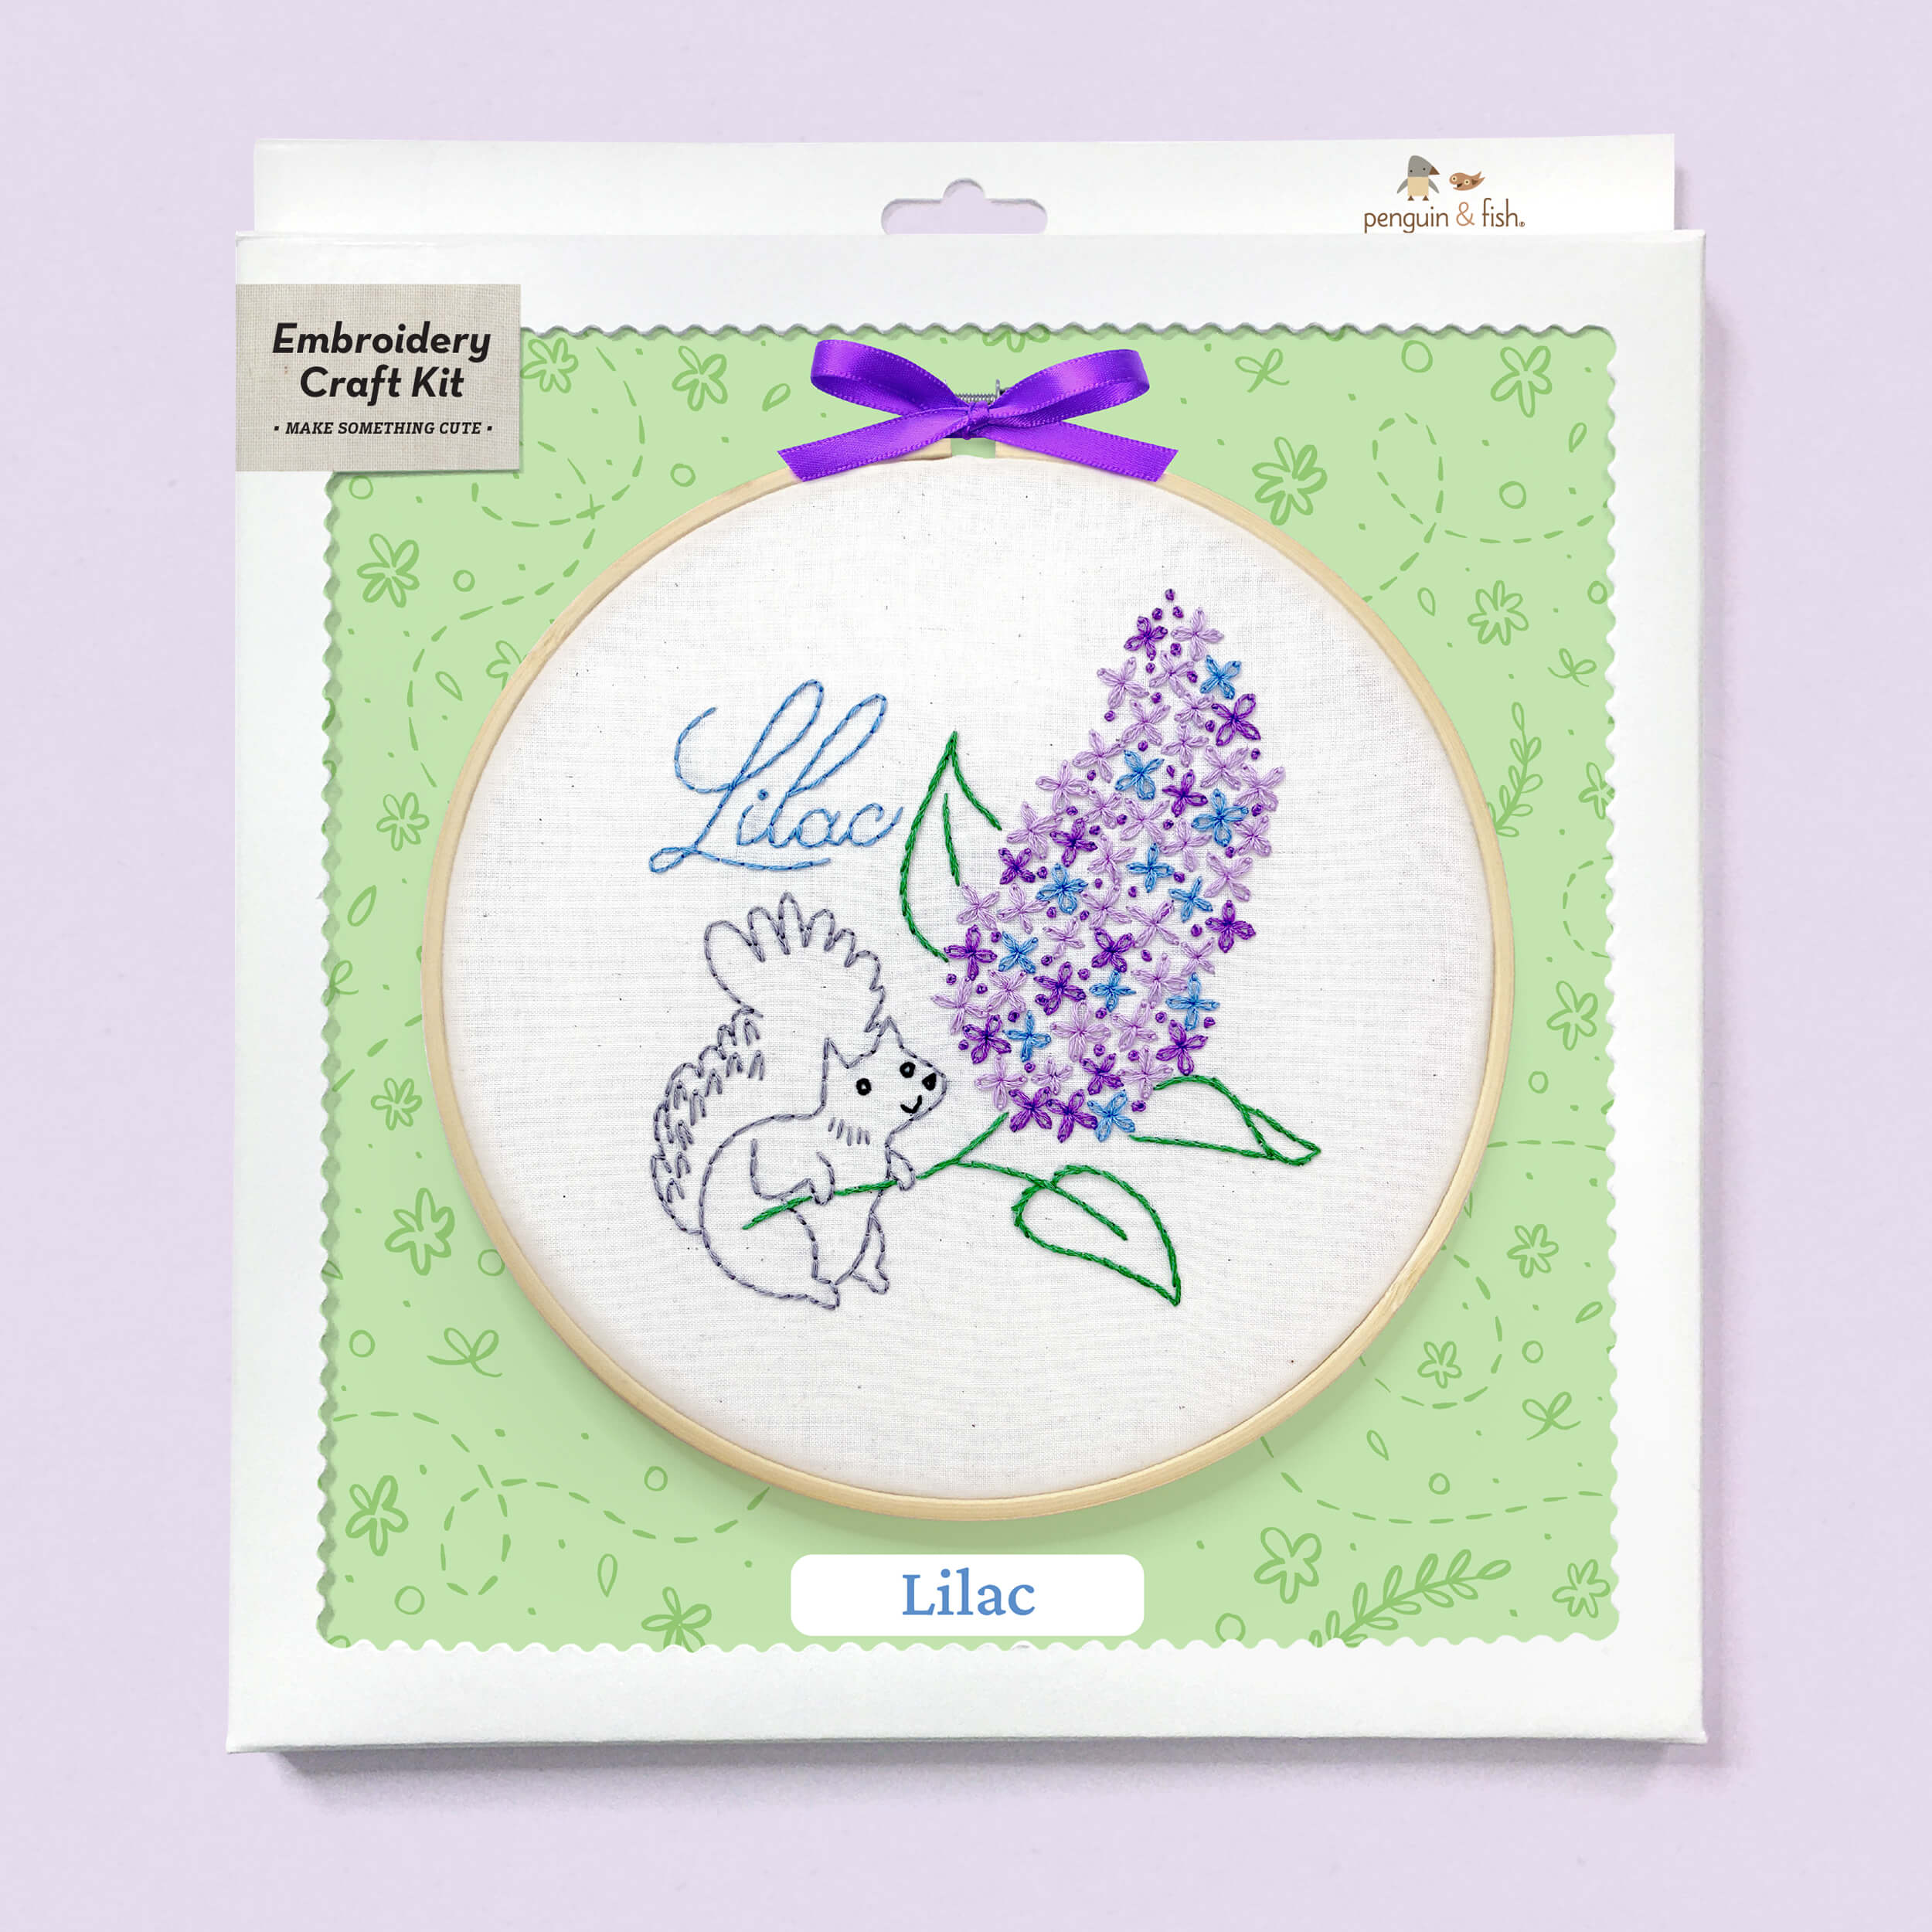 Lilac embroidery kit in a box